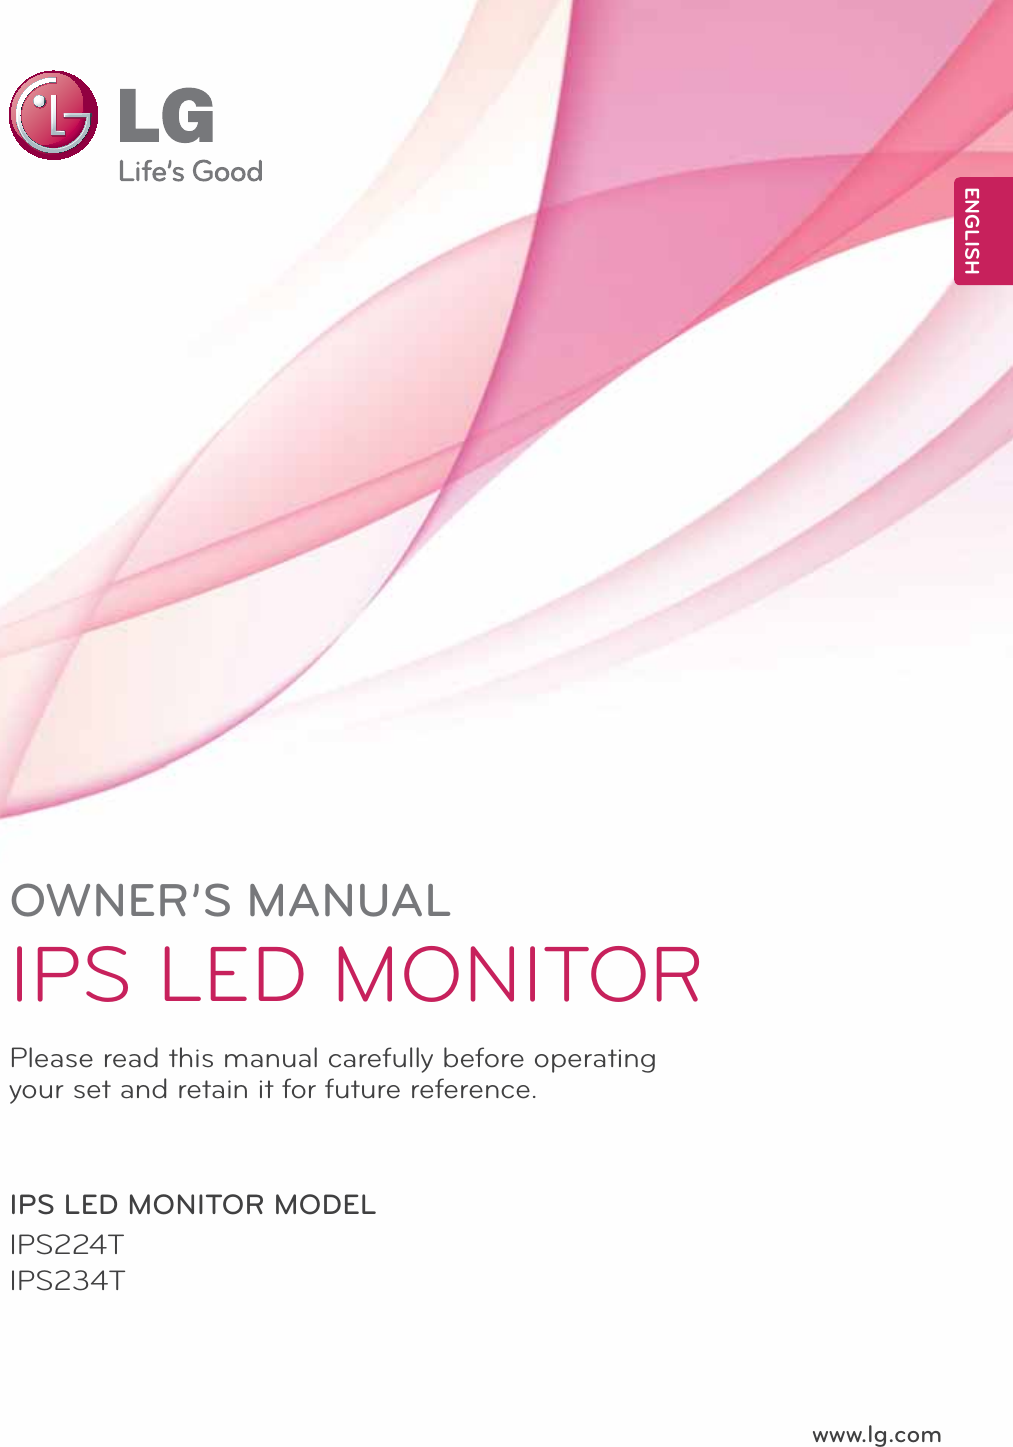 www.lg.comOWNER’S MANUALIPS LED MONITORIPS224TIPS234TPlease read this manual carefully before operating your set and retain it for future reference.IPS LED MONITOR MODELENGLISH